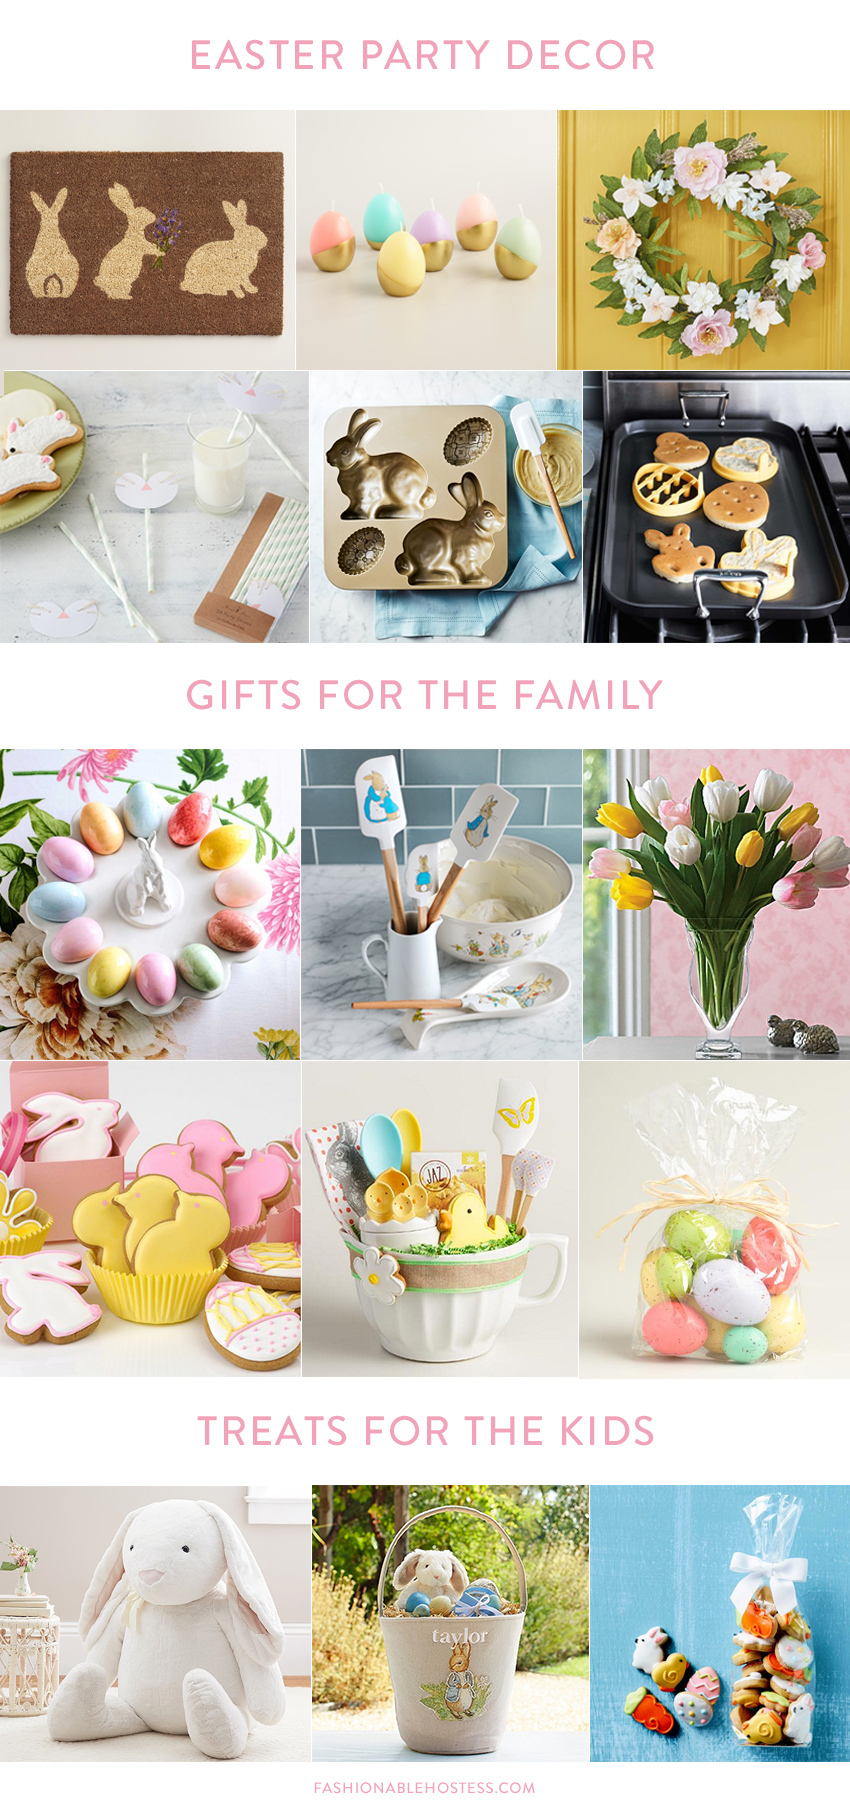 Easter Checklist by FashionableHostess